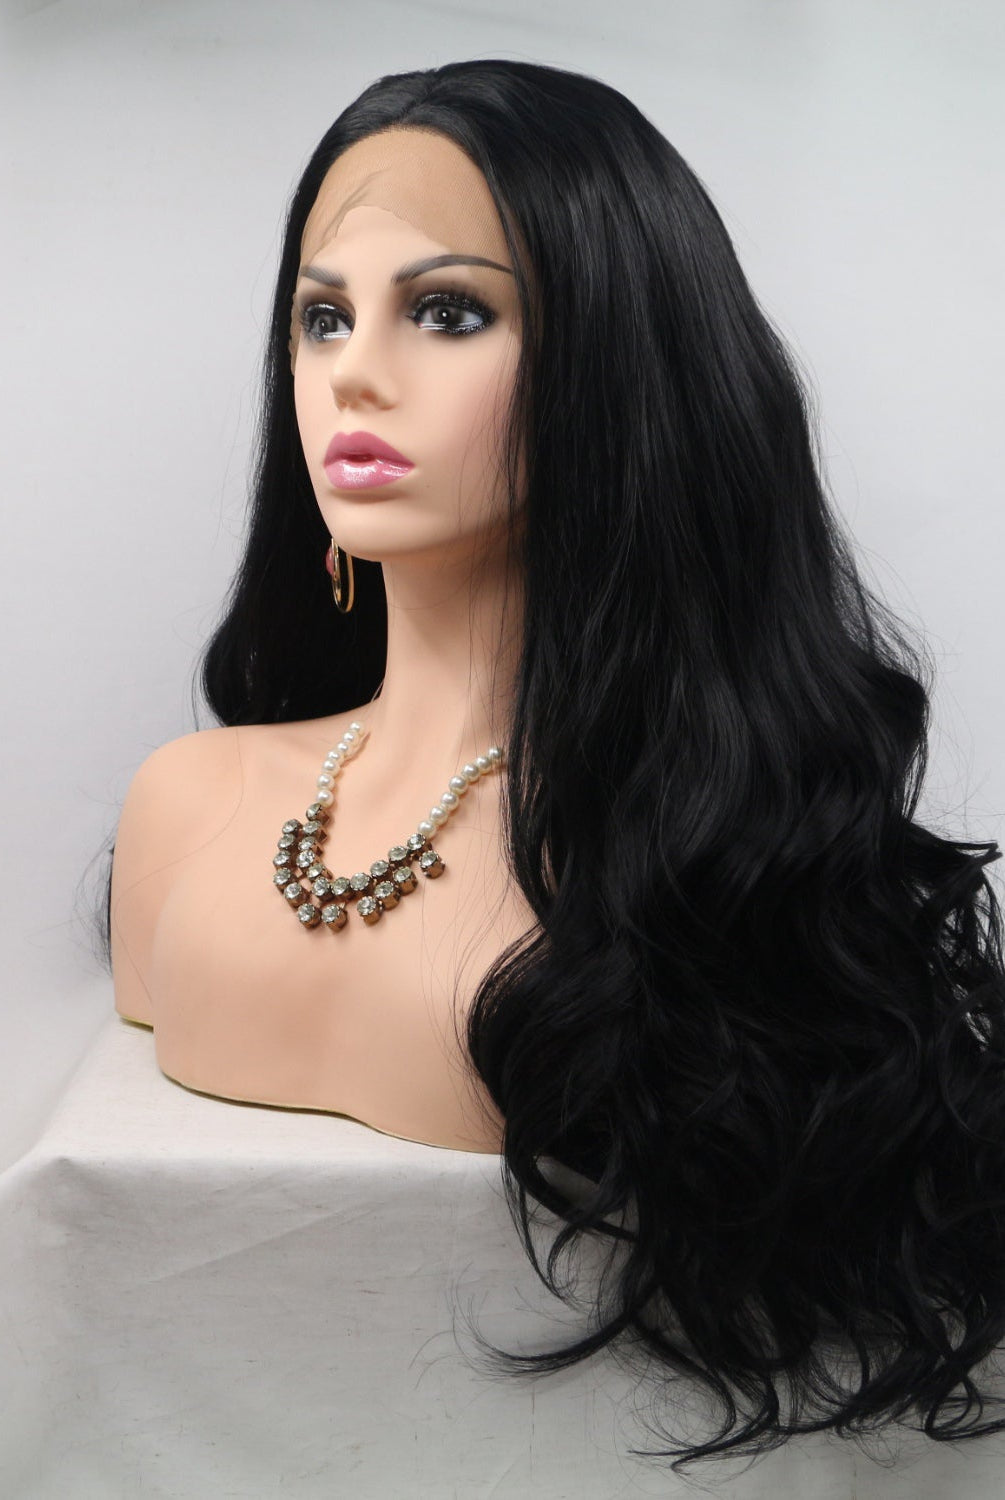 13*3" Lace Front Wigs Synthetic Long Wavy 24" 130% Density - GemThreads Boutique